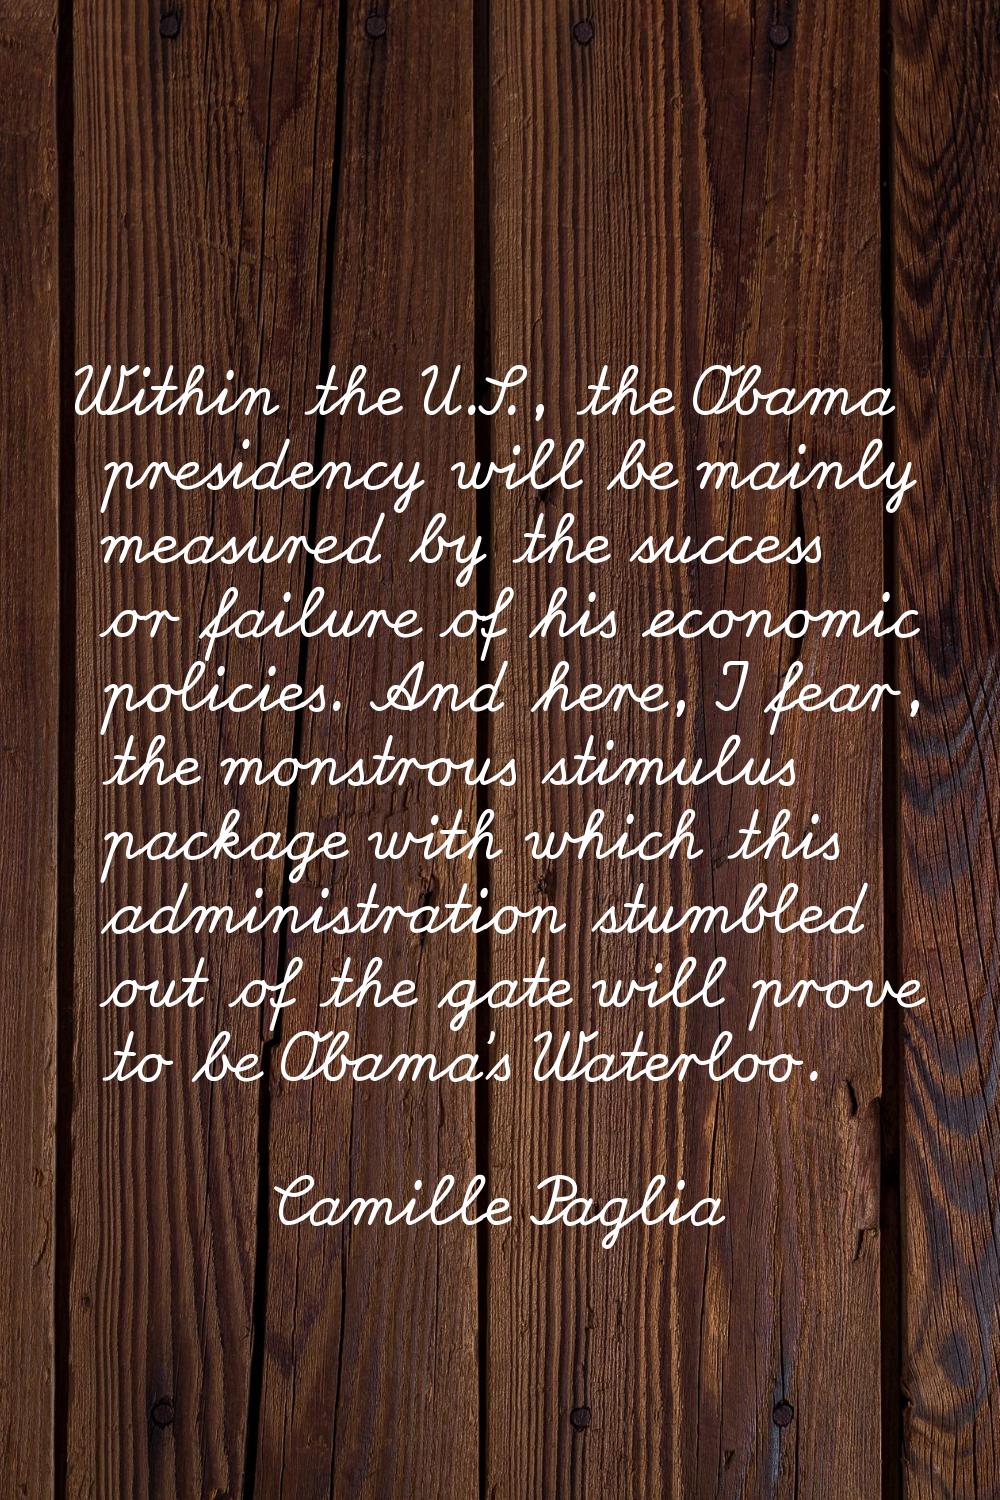 Within the U.S., the Obama presidency will be mainly measured by the success or failure of his econ